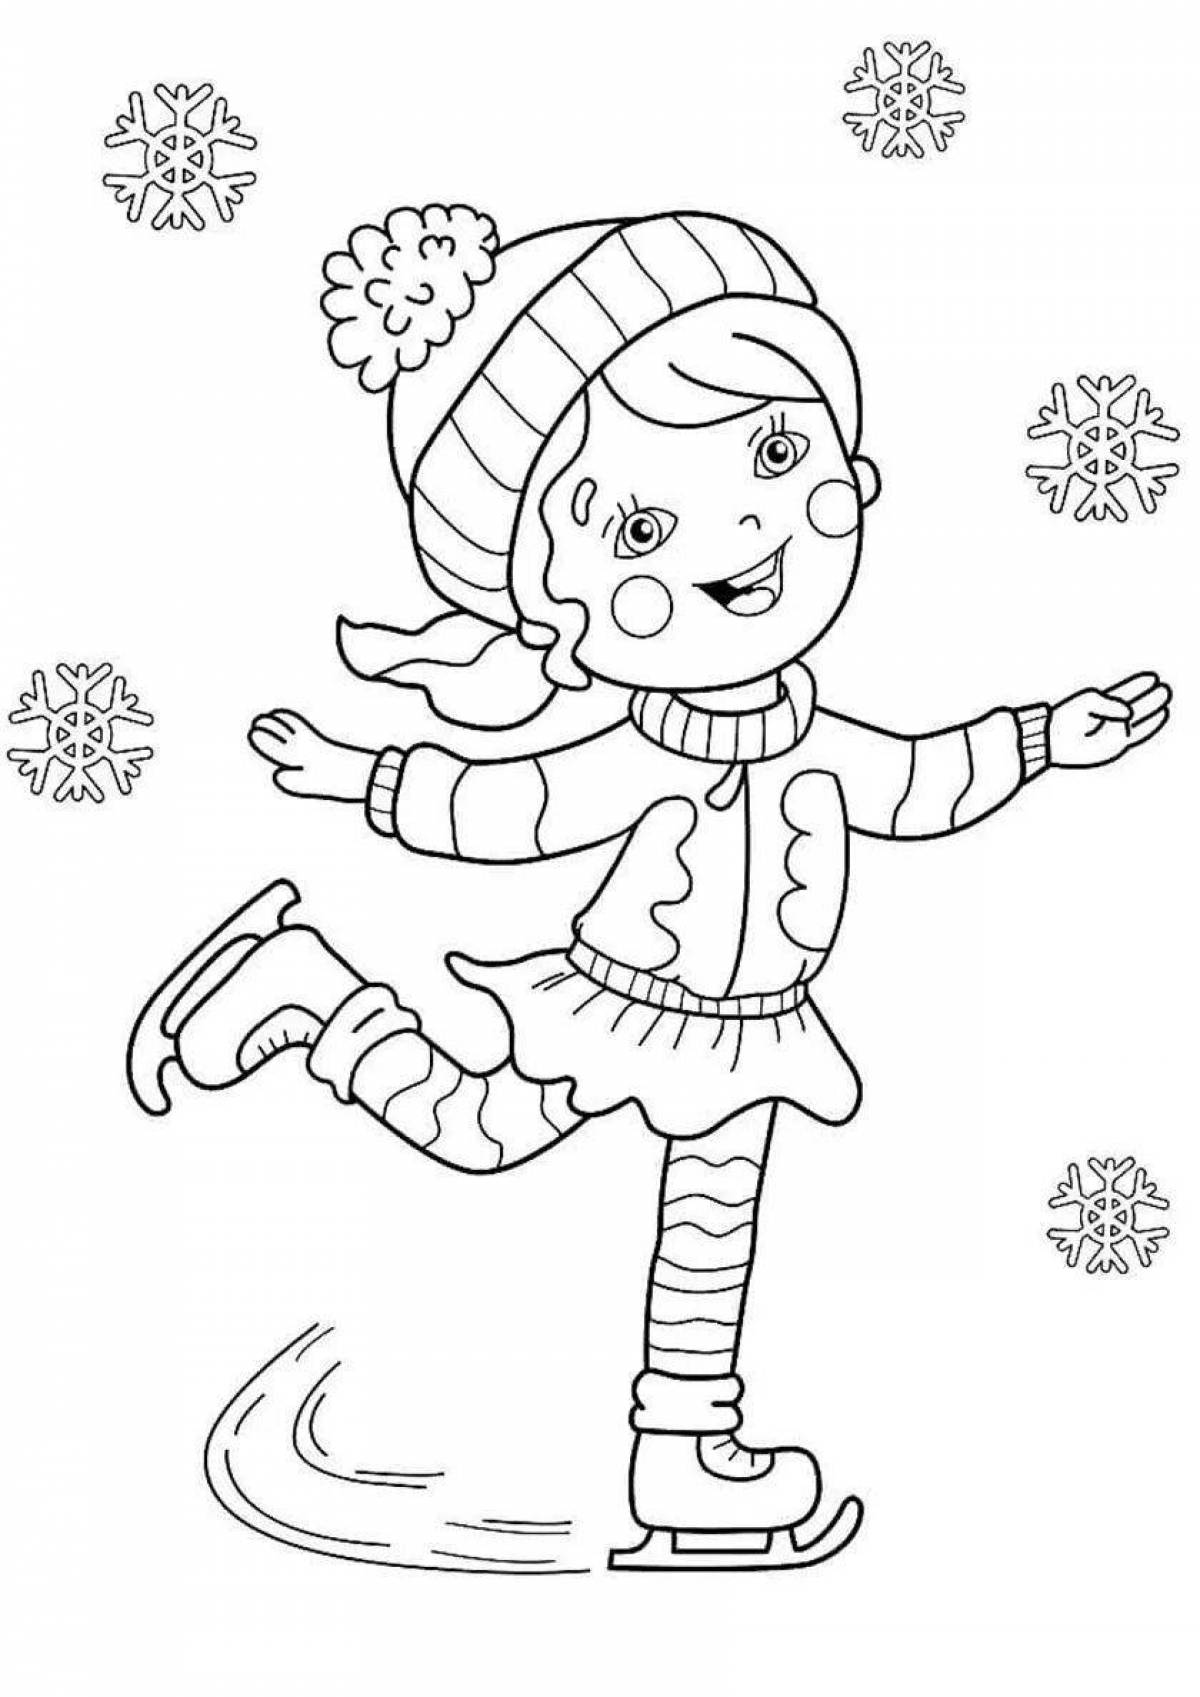 Bright winter sports coloring page